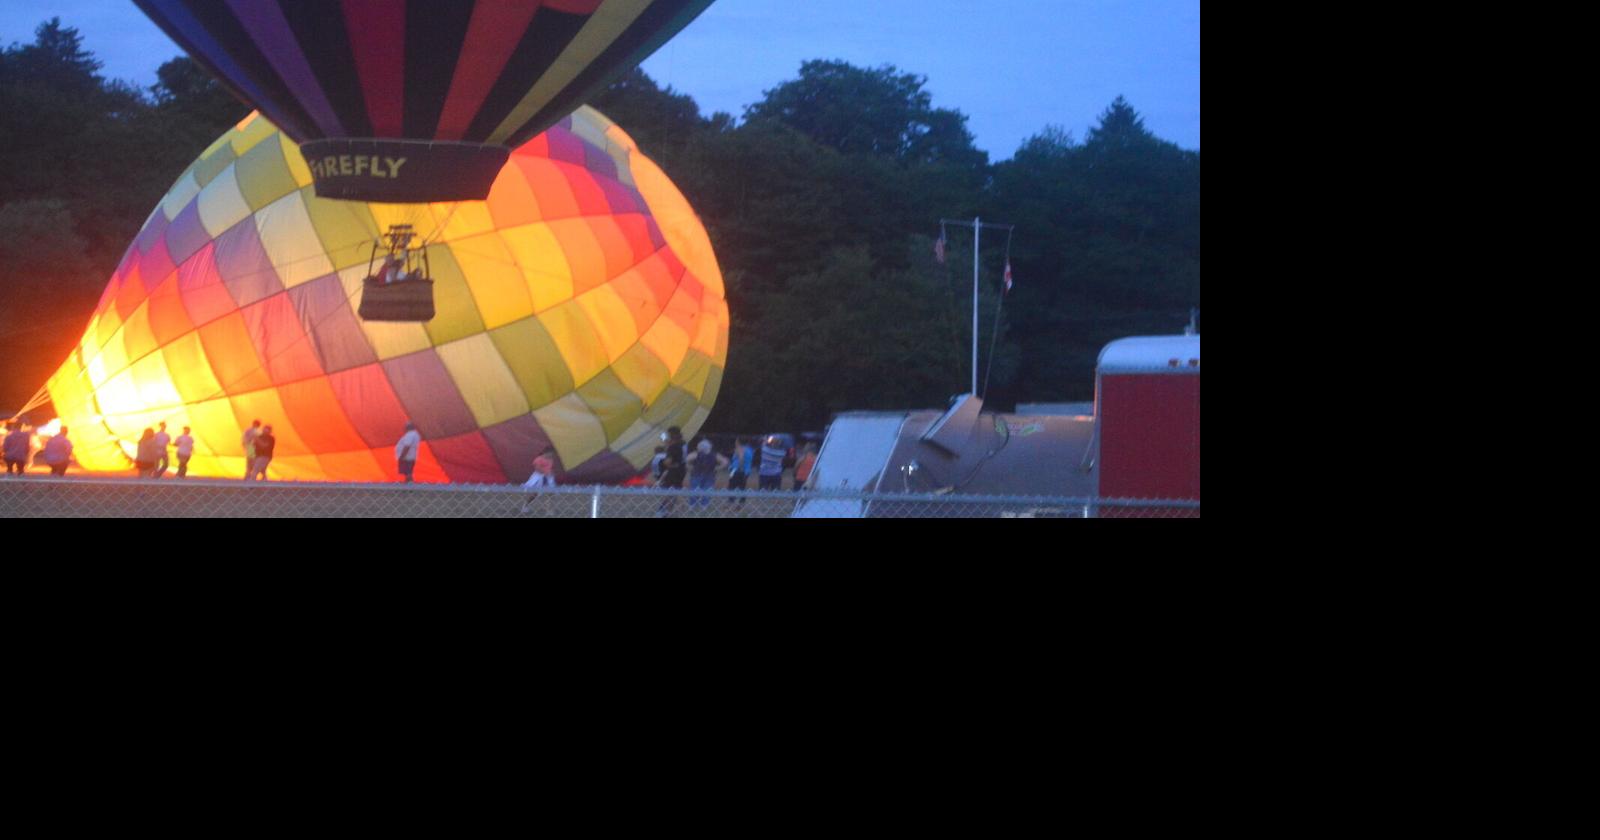 Good launches, crowd at Wellsville Balloon Rally 2022 | New – Balloon ENB